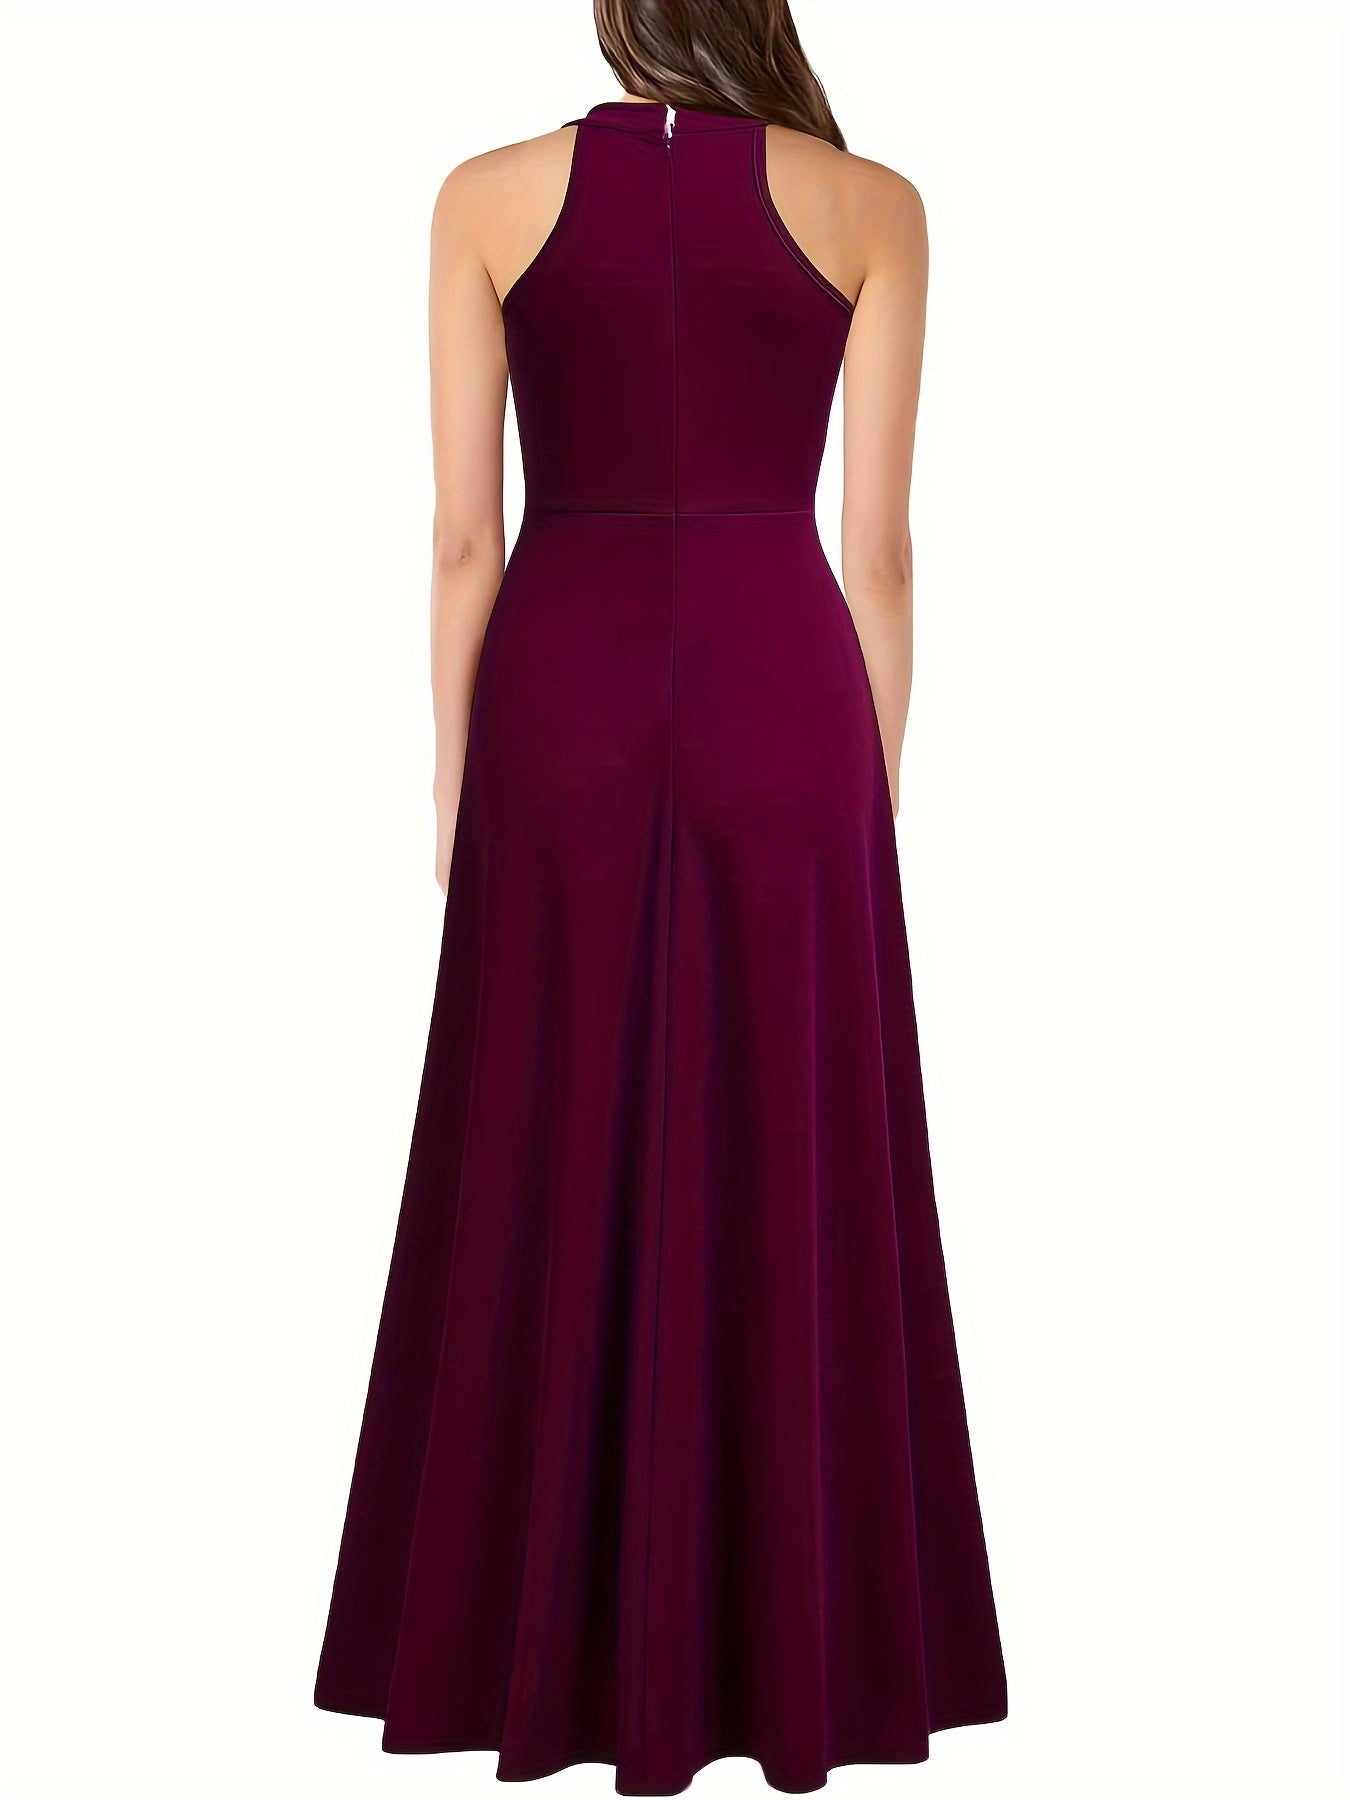 Empower Your Style with Our Elegant Split Thigh Maxi Dress - Women's Clothing Collection